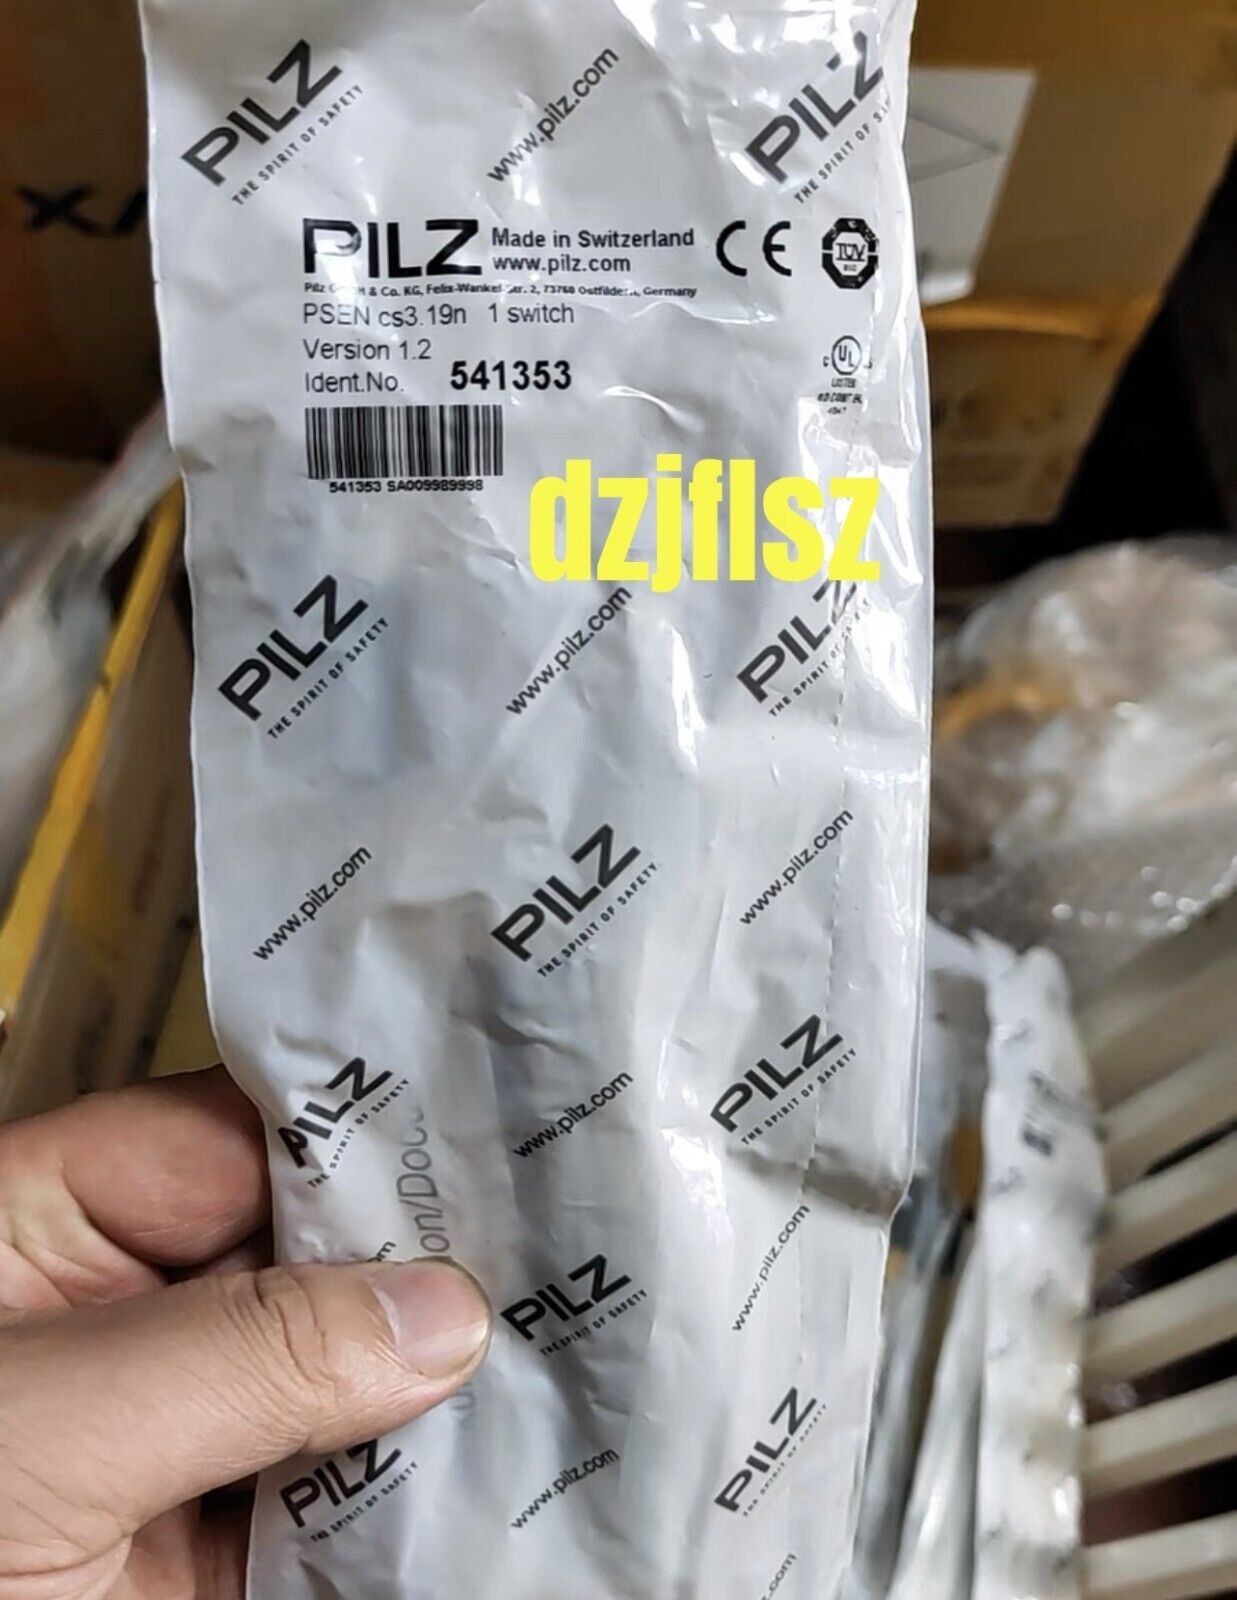 1pcs Brand new PILZ safety switch PSEN cs3.19n 541353 Rapid delivery